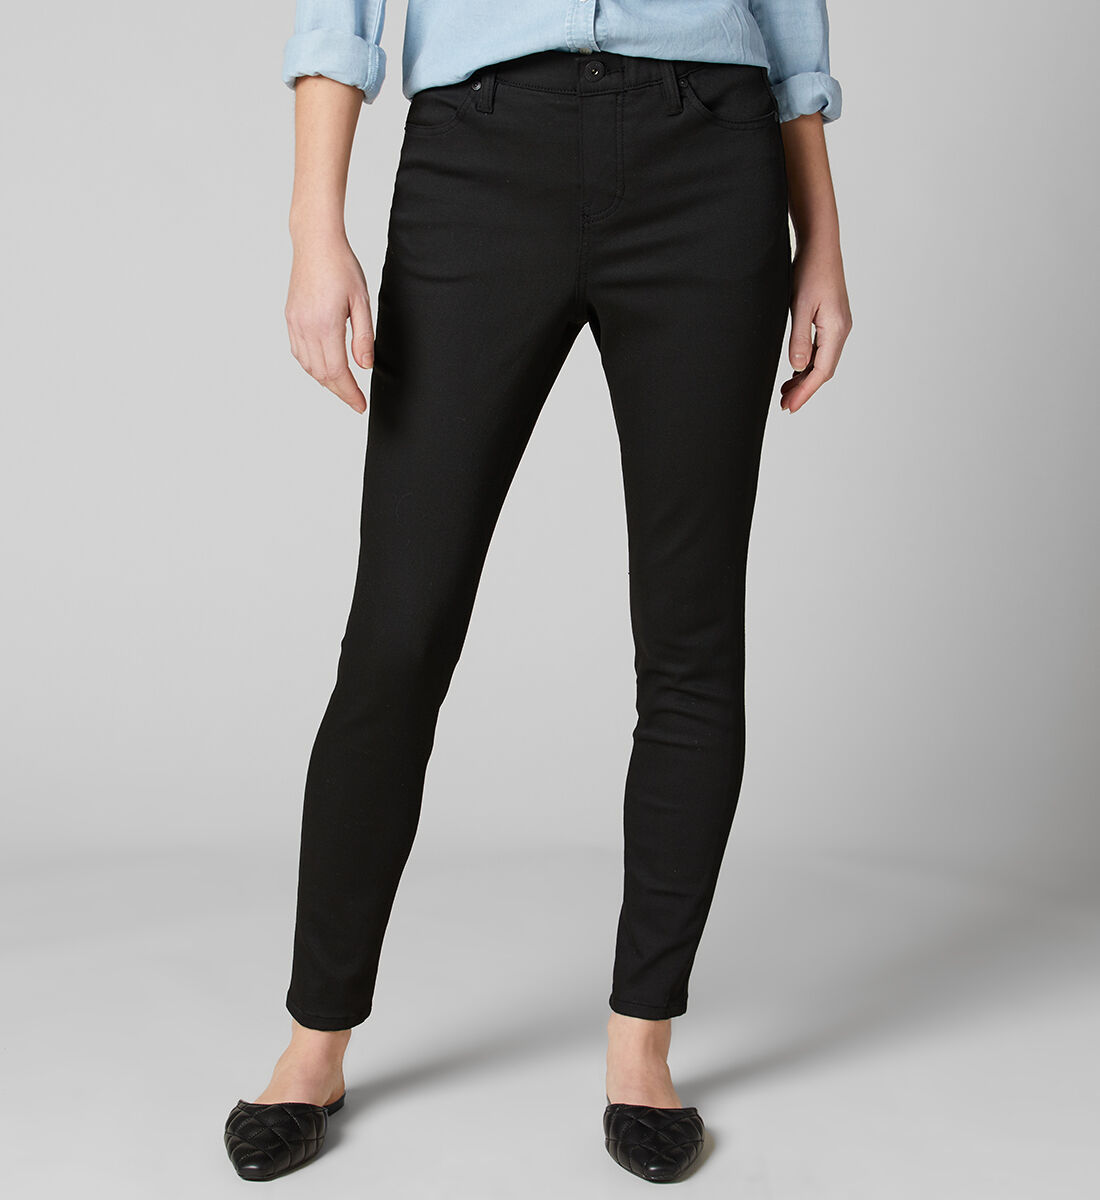 Valentina High Rise Skinny Pull-On Jeans Side